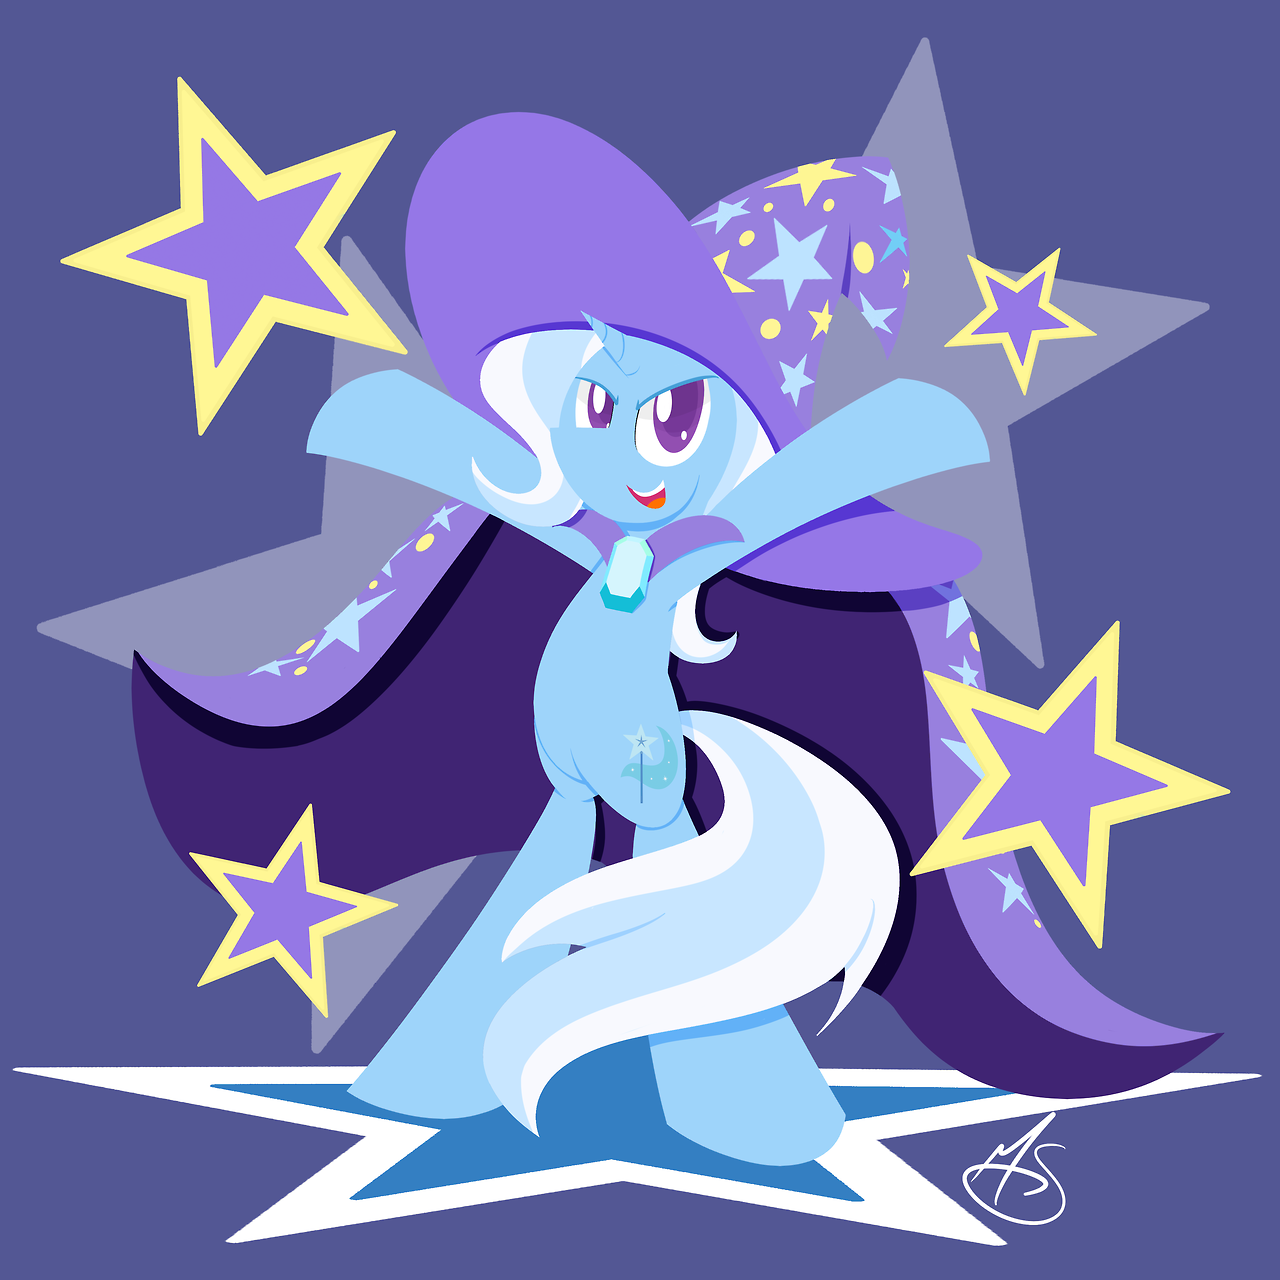 1420269__safe_artist-colon-mystery-dash-artbox_trixie_bipedal_pony_solo_the+great+and+powerful_unicorn.png